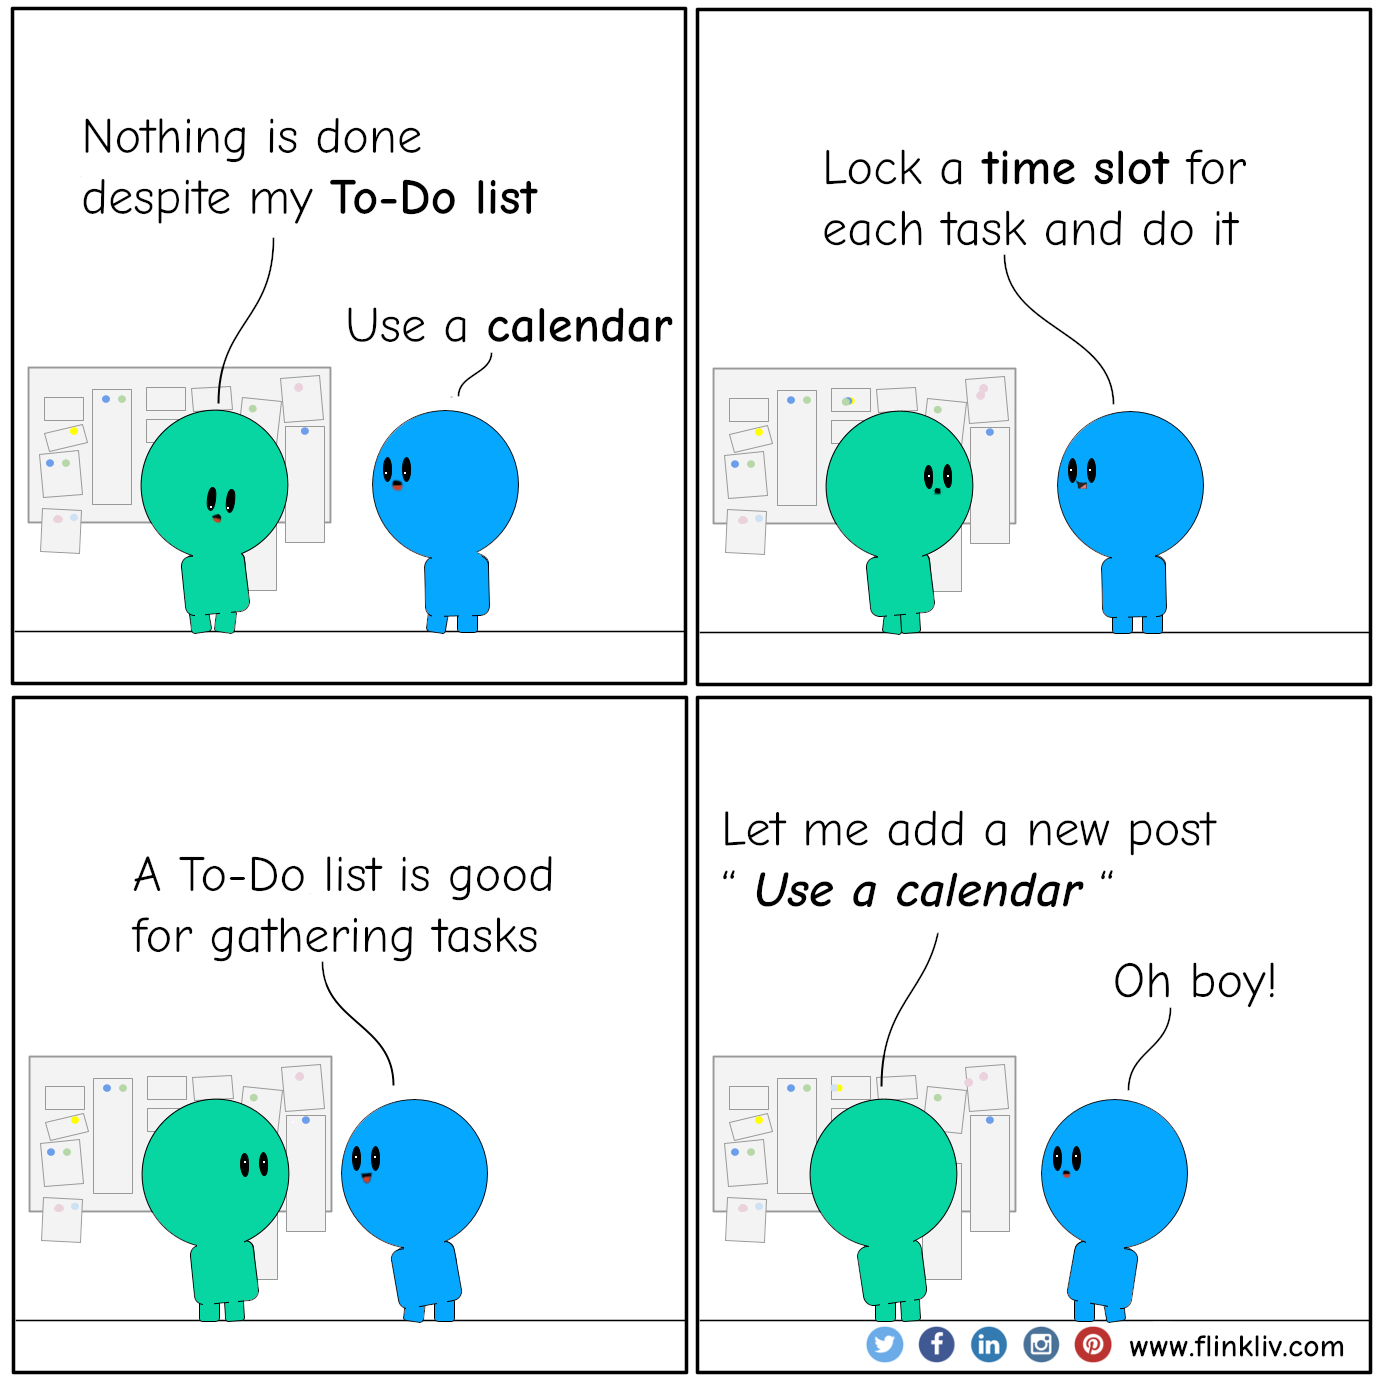 Conversation between A and B about using a calendar instead of To-Do list.
				A: Nothing is done despite my To-Do list 
				B: Use a calendar
				B: Lock a time slot for each task and do it
				B: A To-Do list is good for gathering tasks.
				A: Let me add a new post … Use a calendar
				B: Oh boy!
				